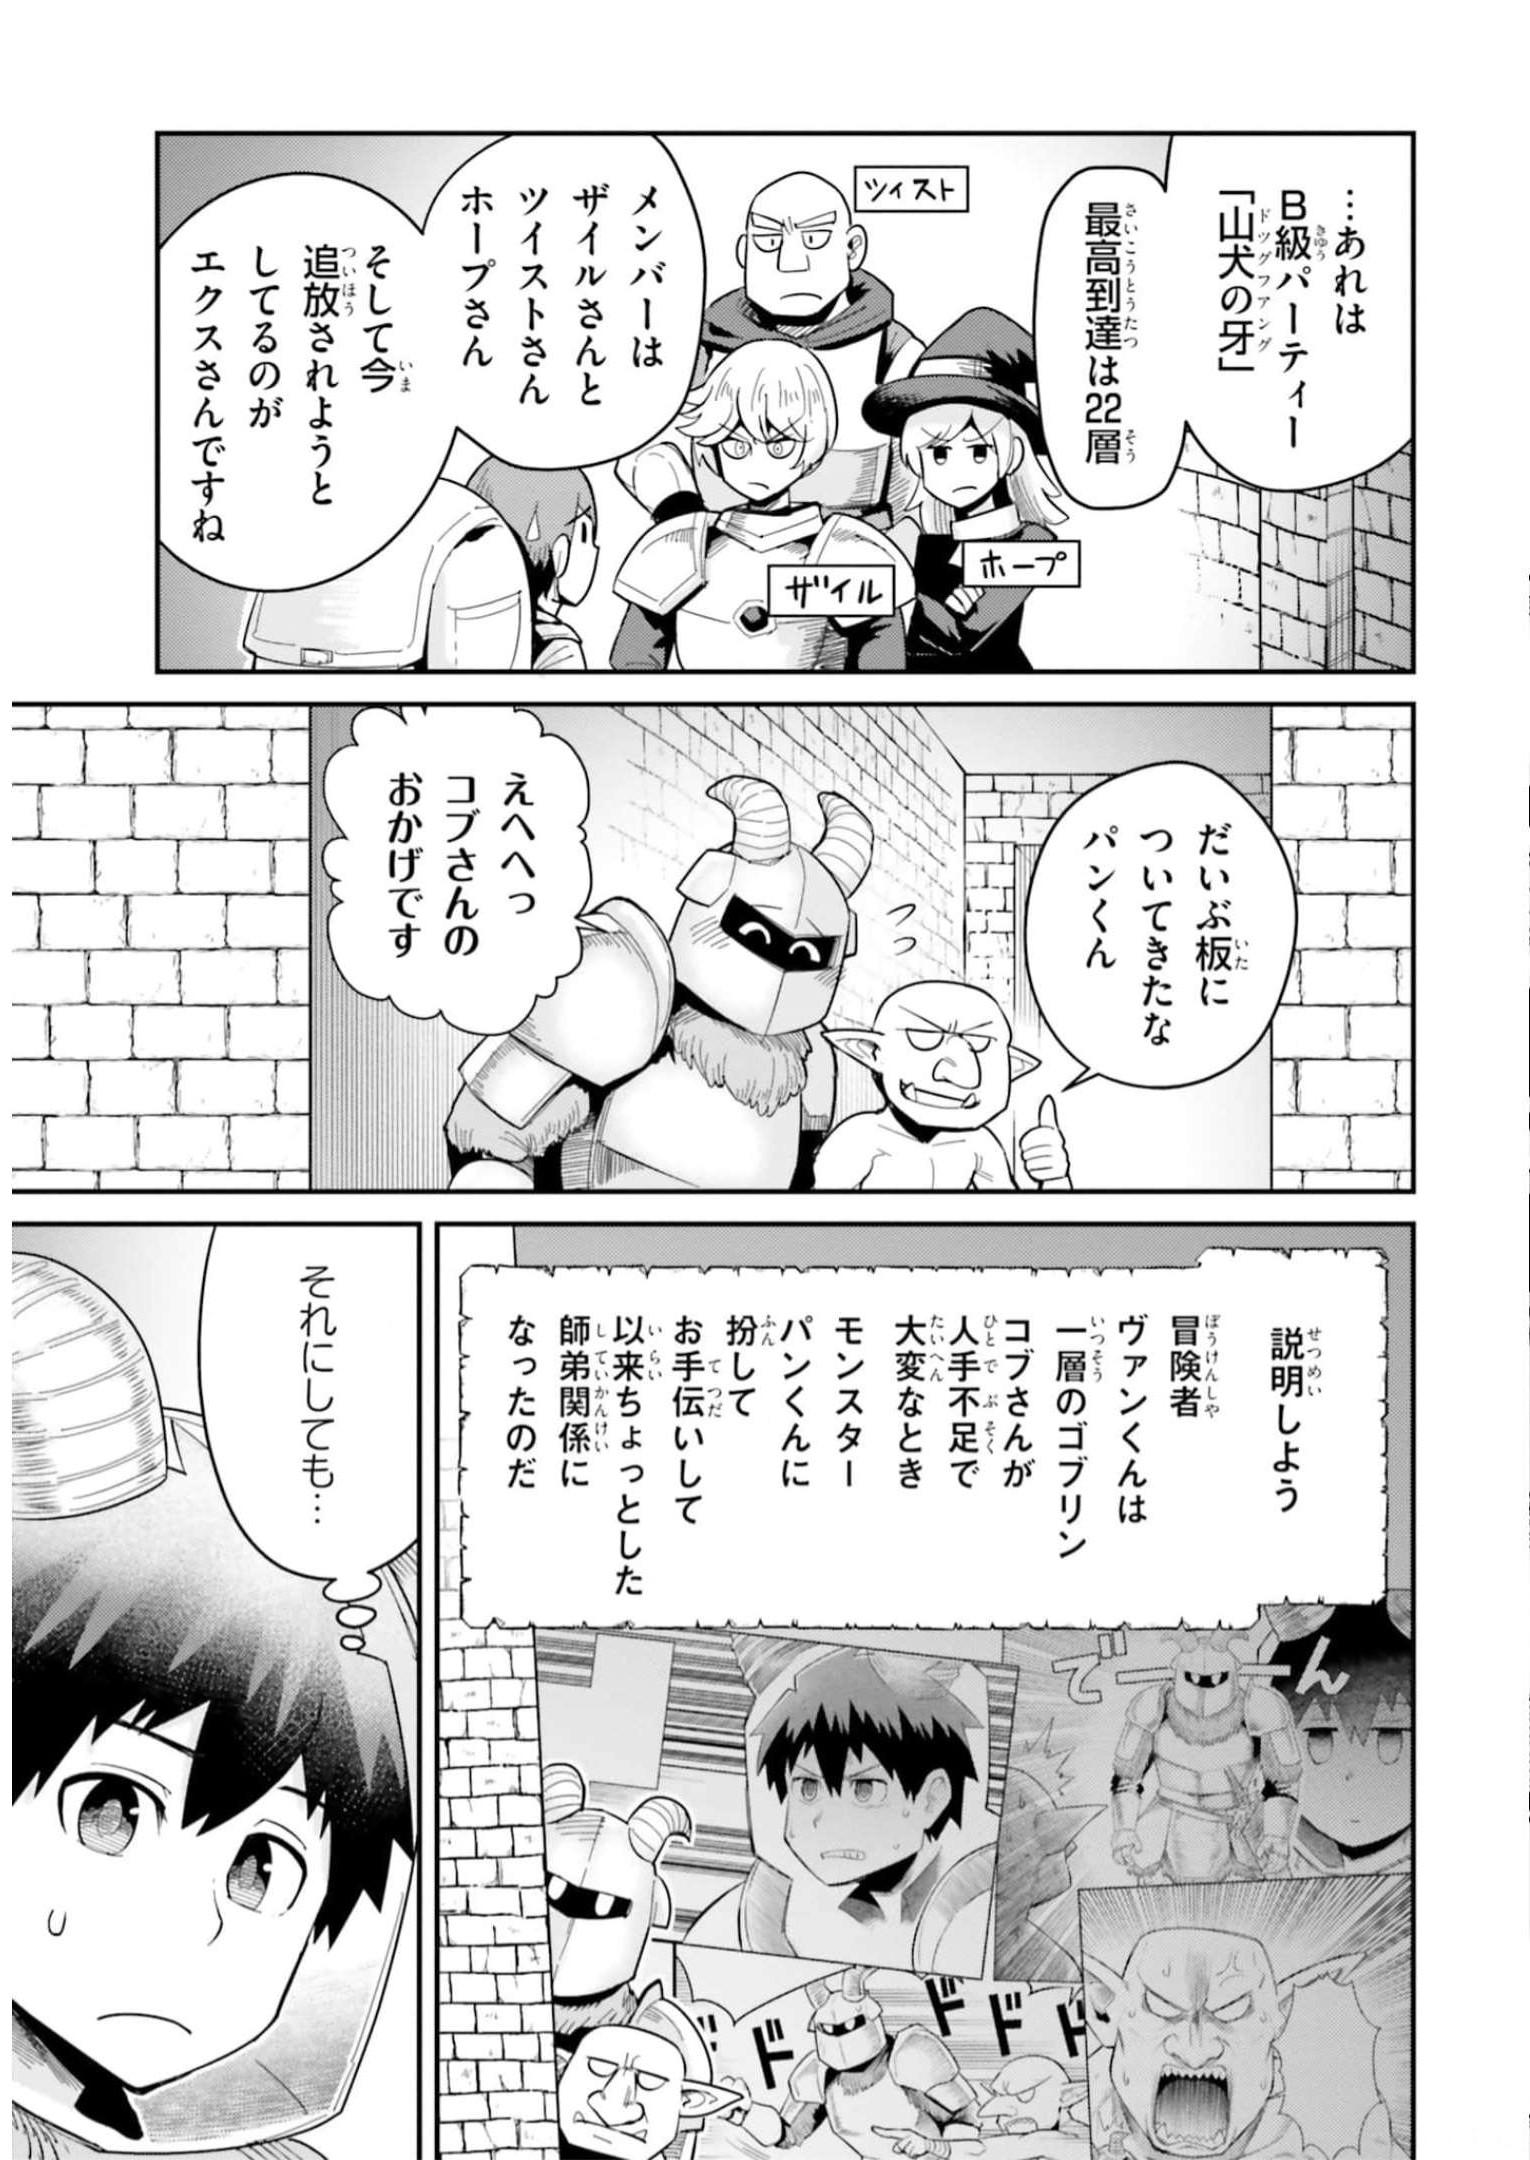 Dungeon Friends Forever Dungeon’s Childhood Friend ダンジョンの幼なじみ 第25話 - Page 3